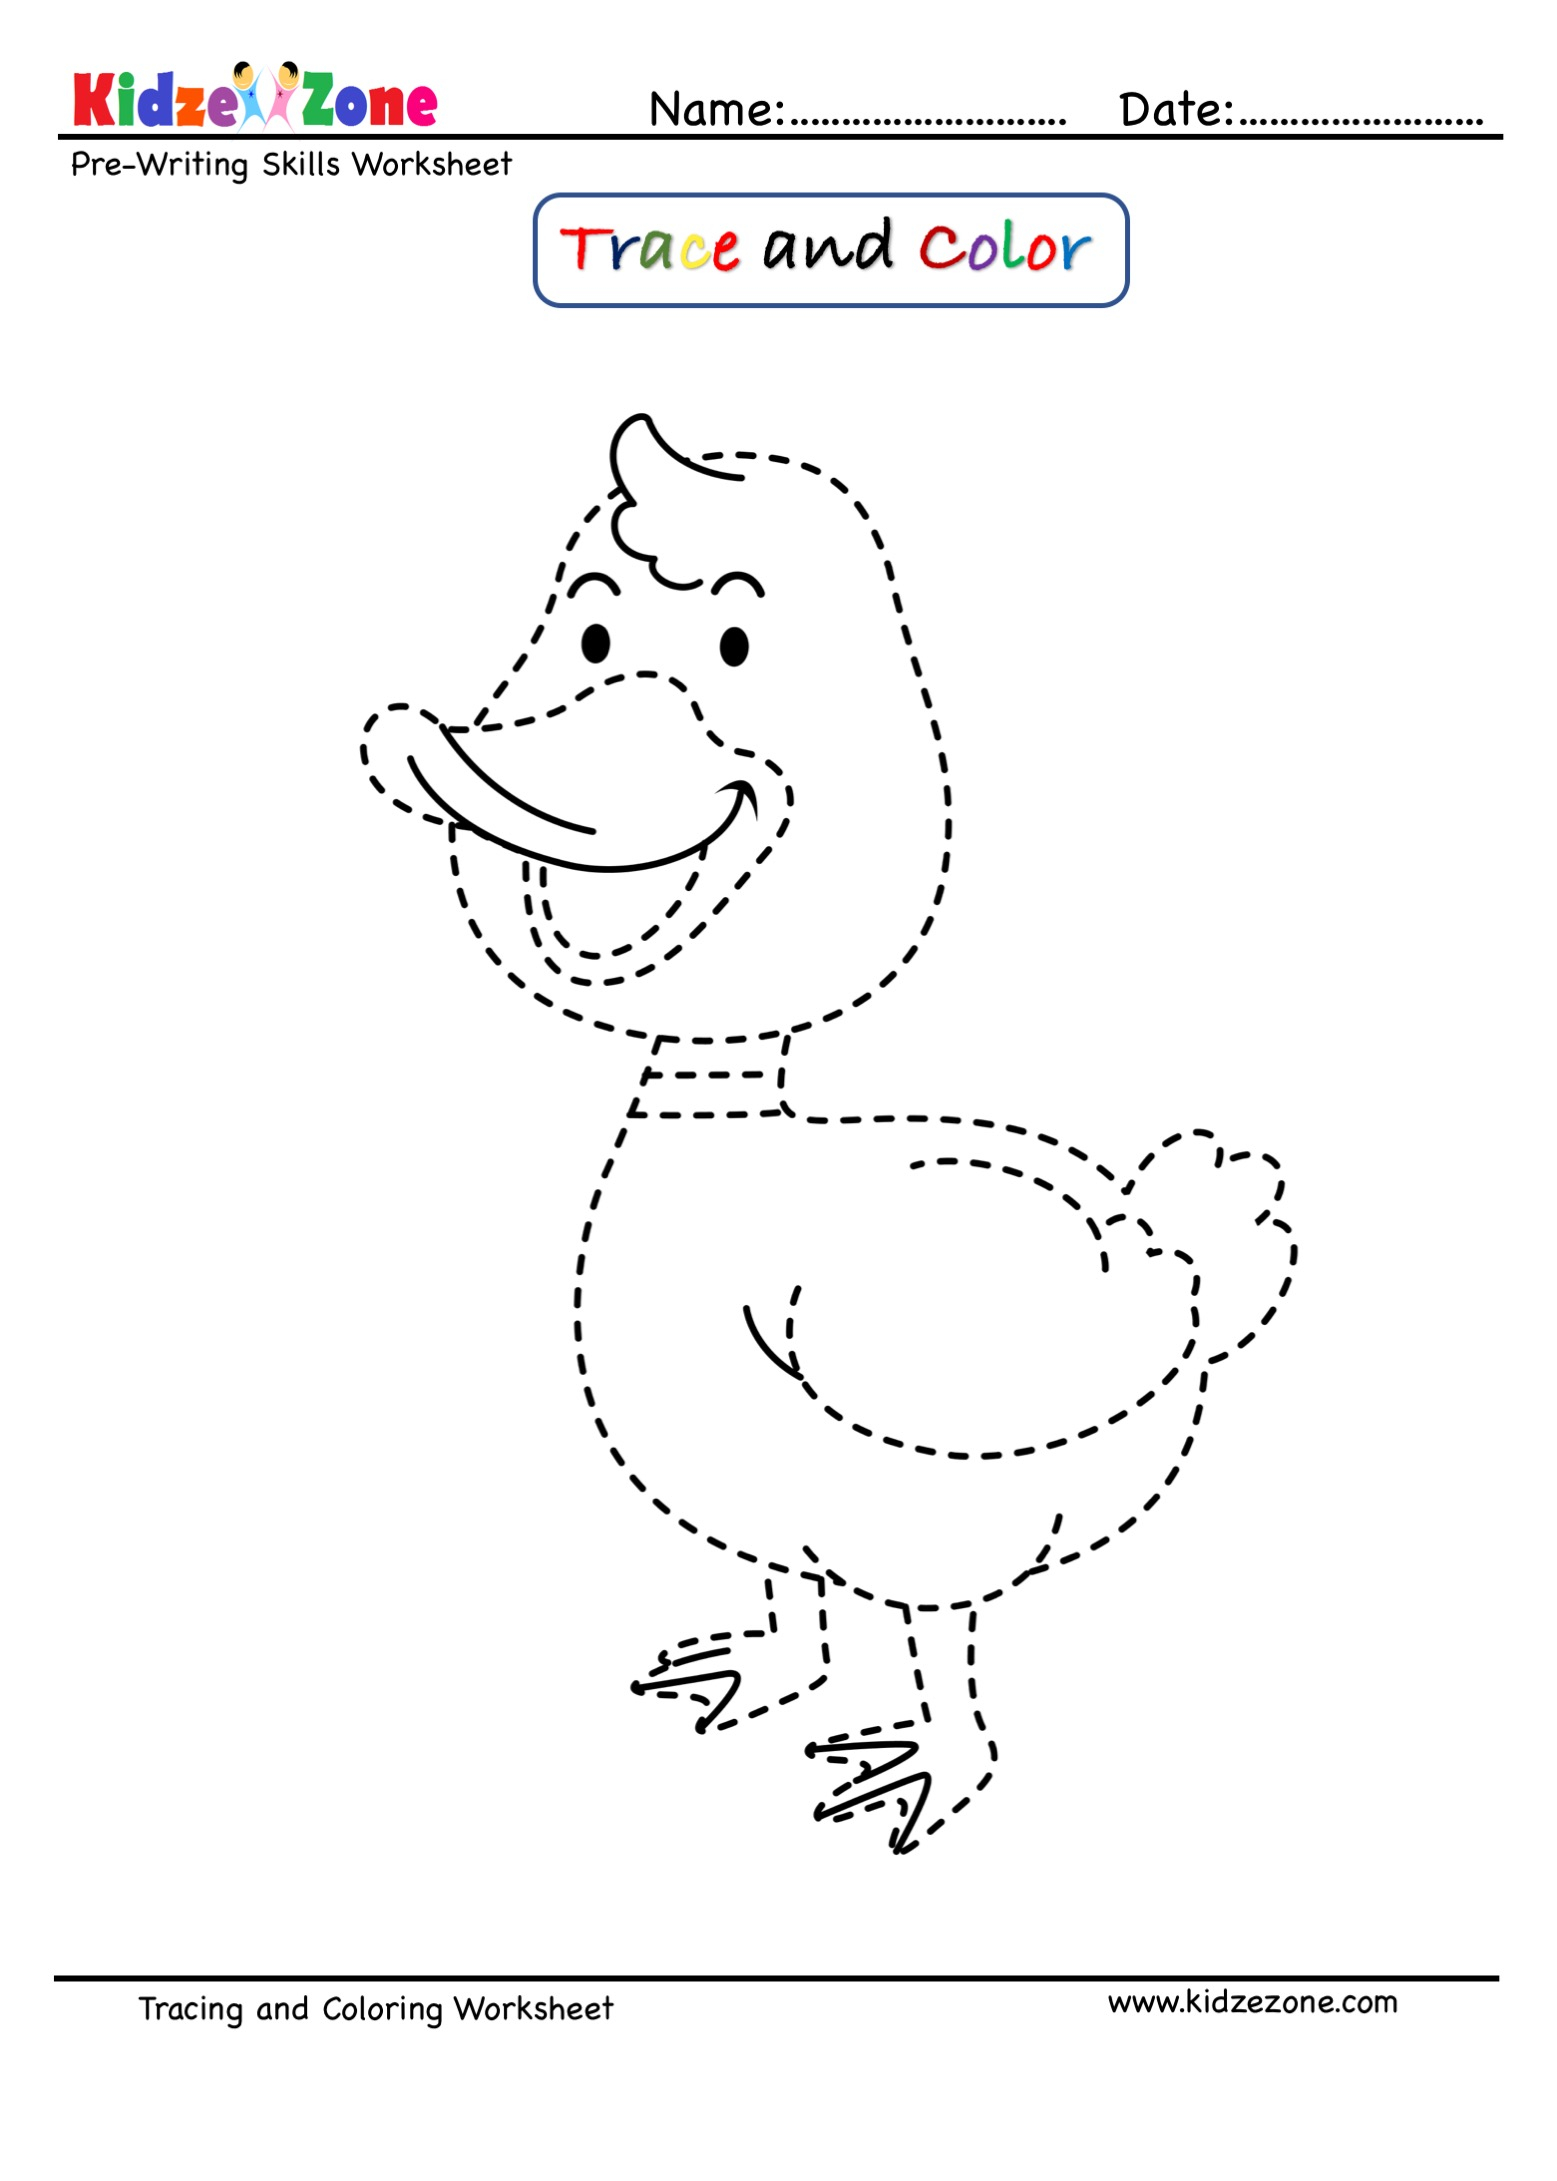 Pre-Writing Trace And Color Worksheet : Duck Cartoon - Kidzezone